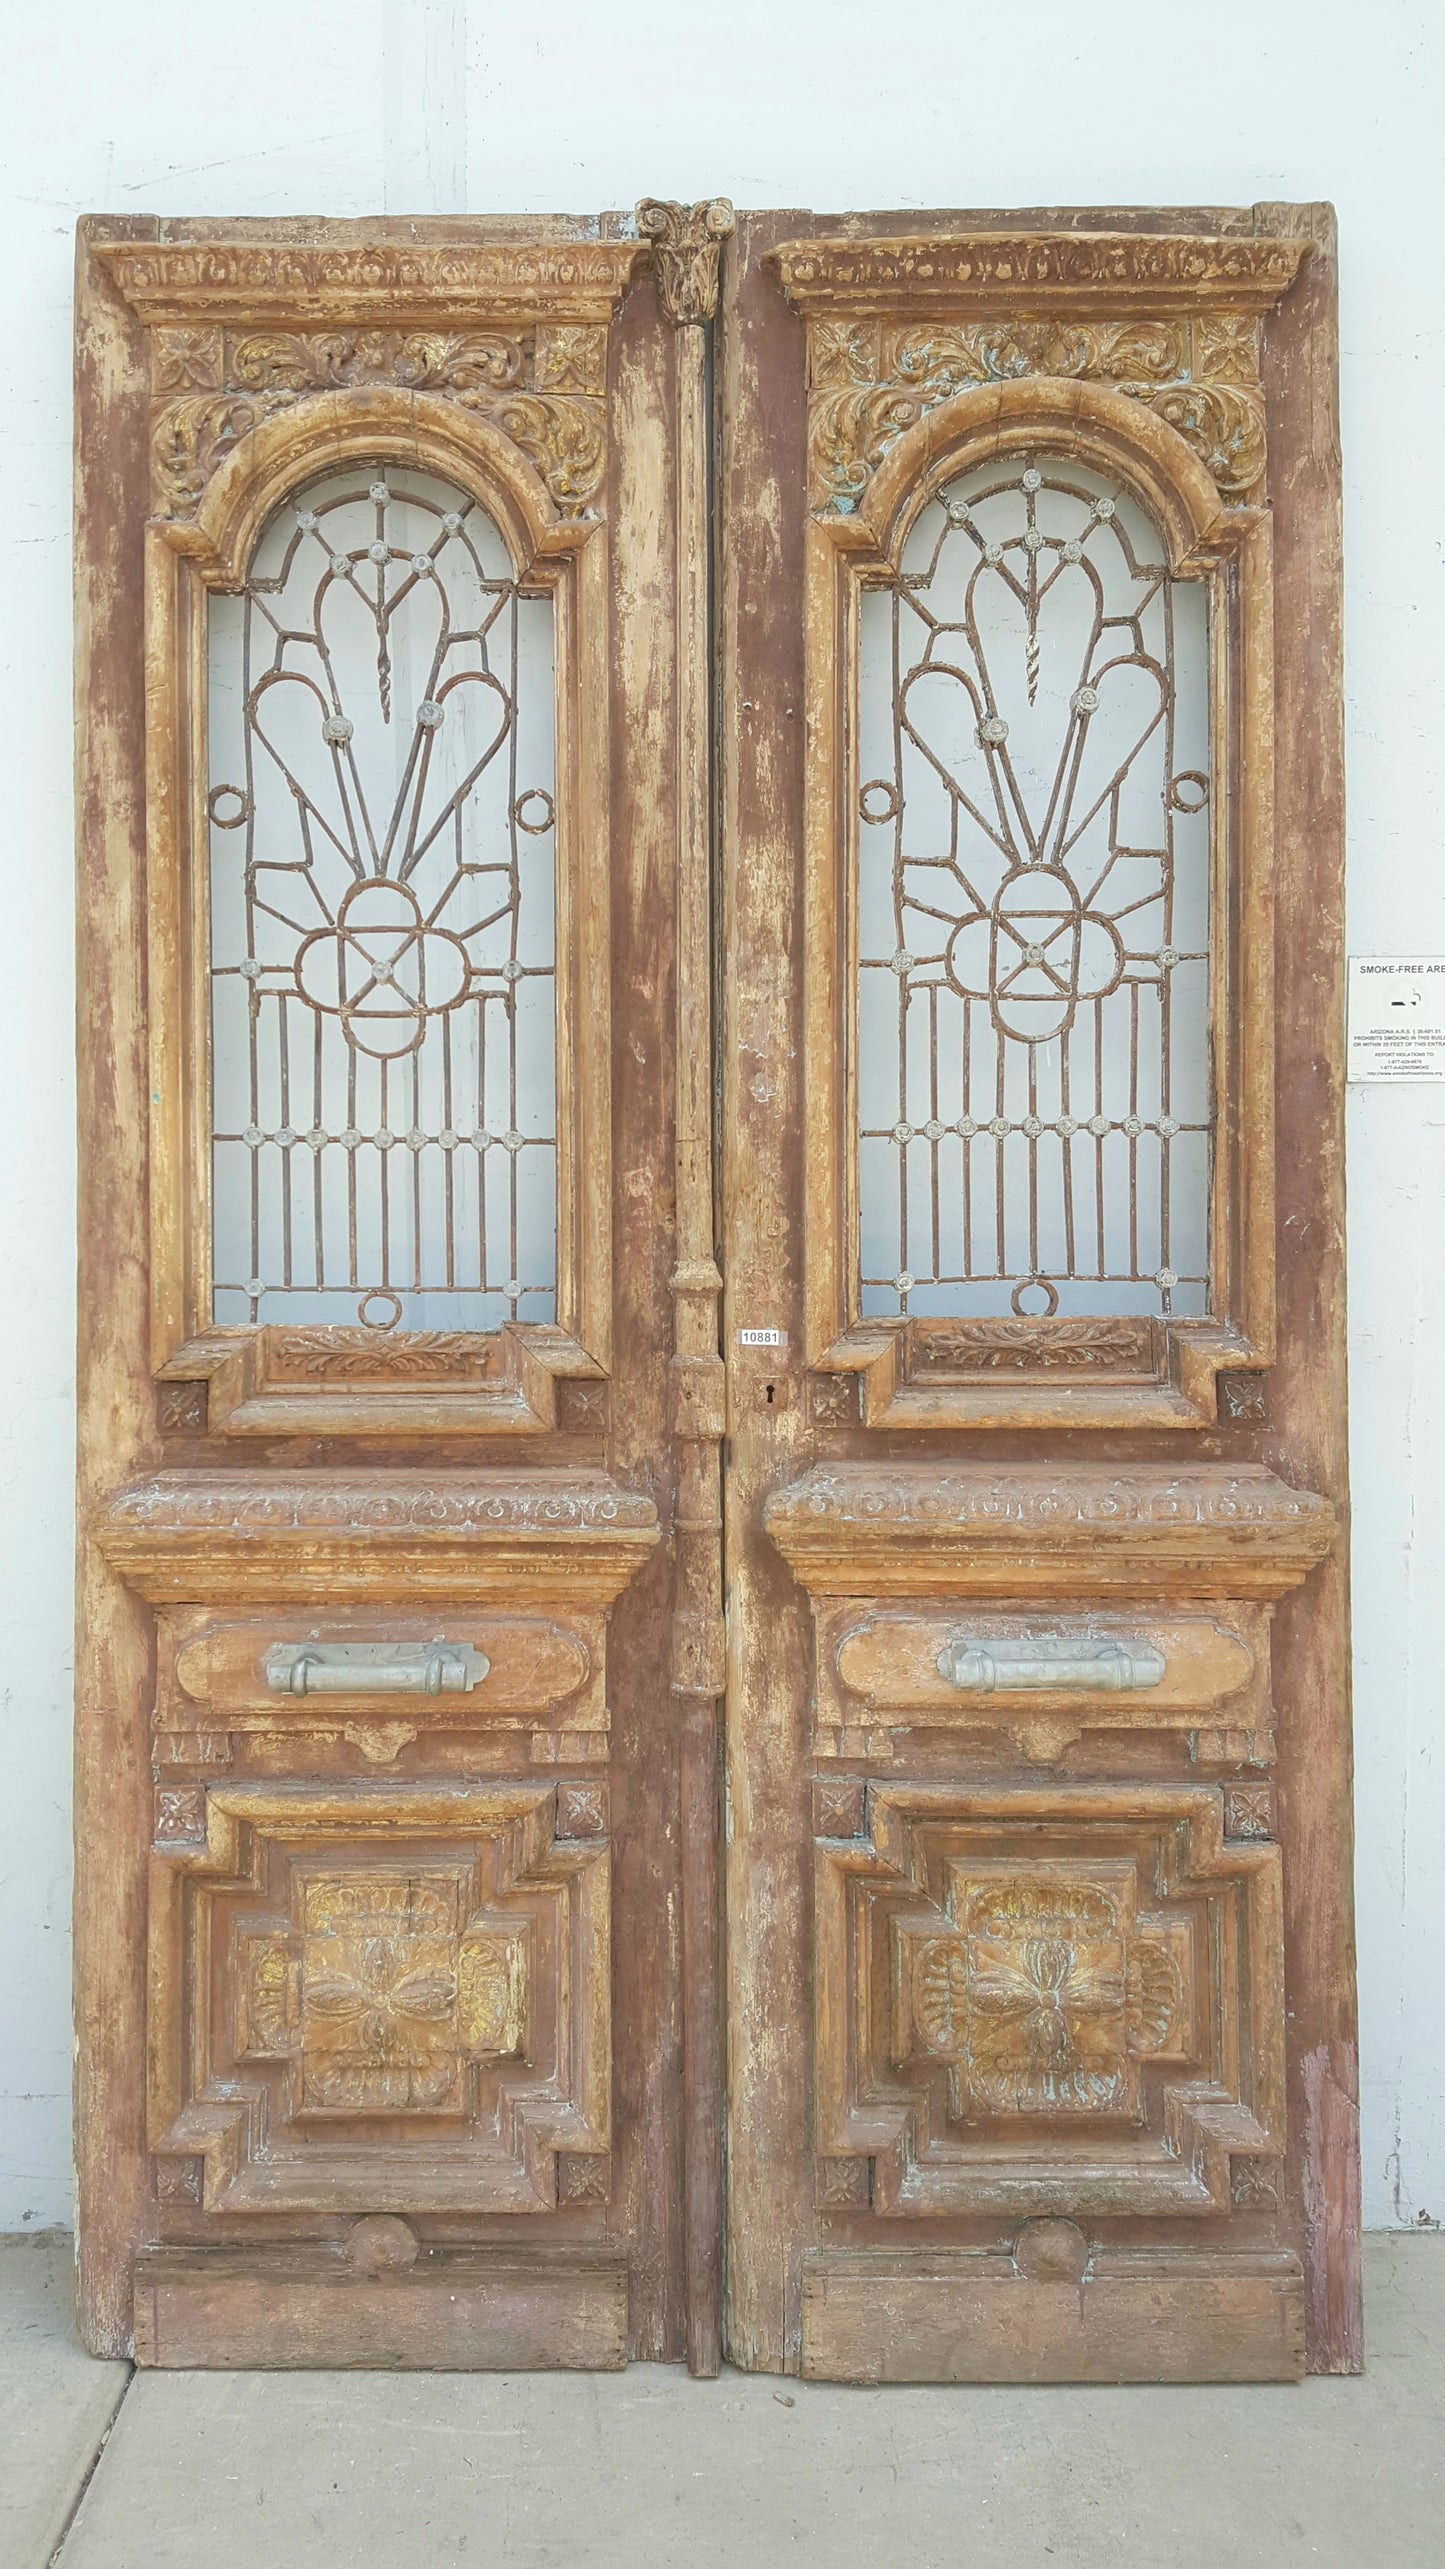 Pair of Ornate Wood Antique Carved Doors with Iron Inserts (no glass)